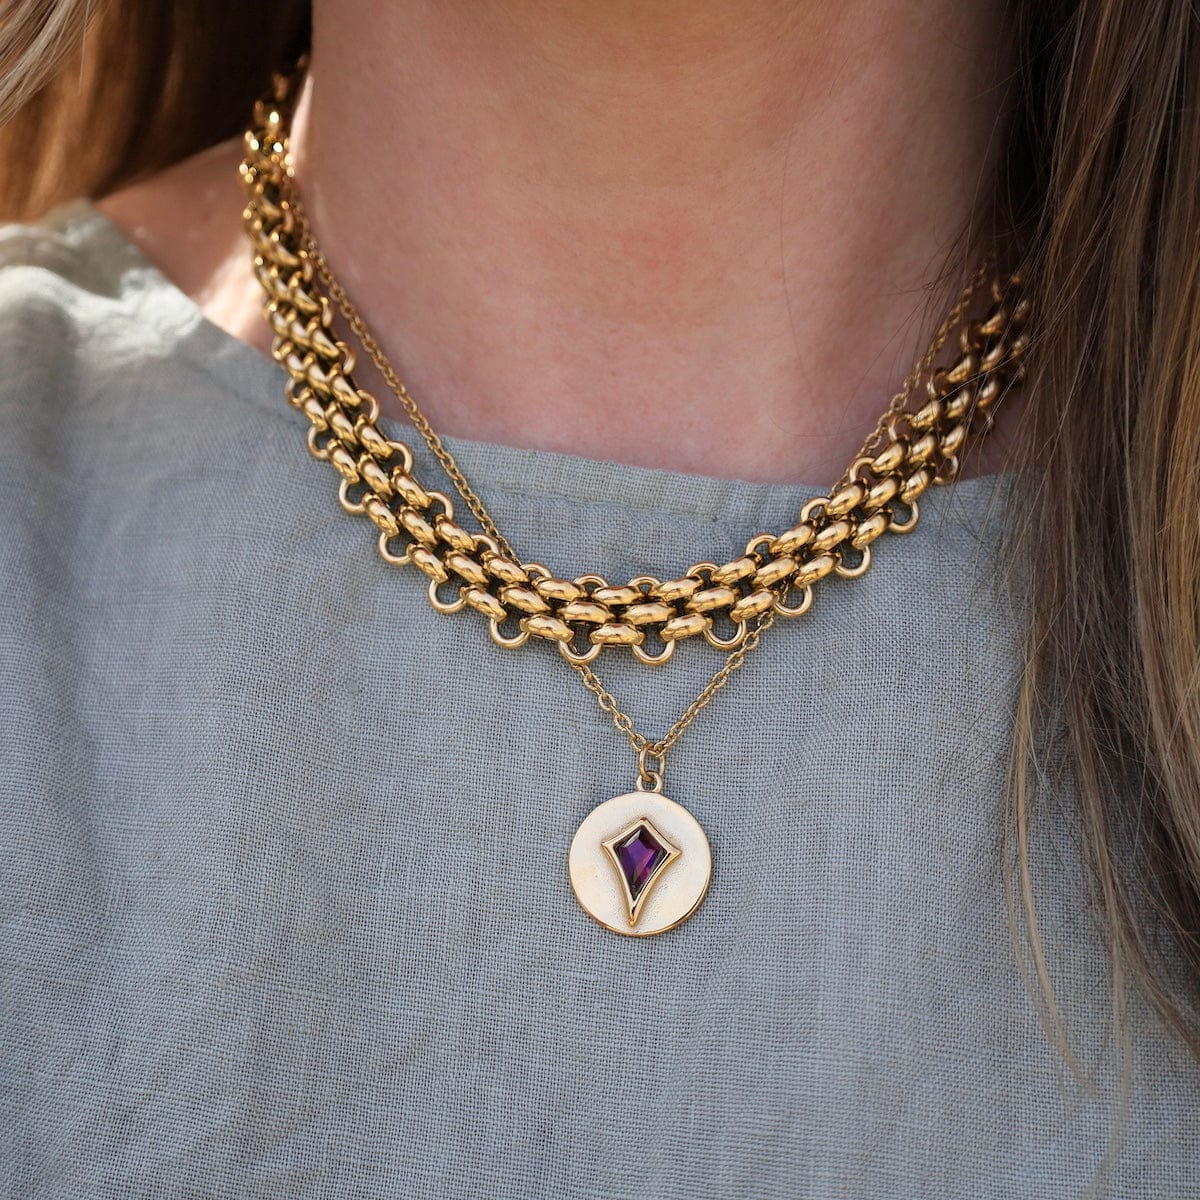 NKL-GPL Betty // The Necklace - 18k gold plated stainless